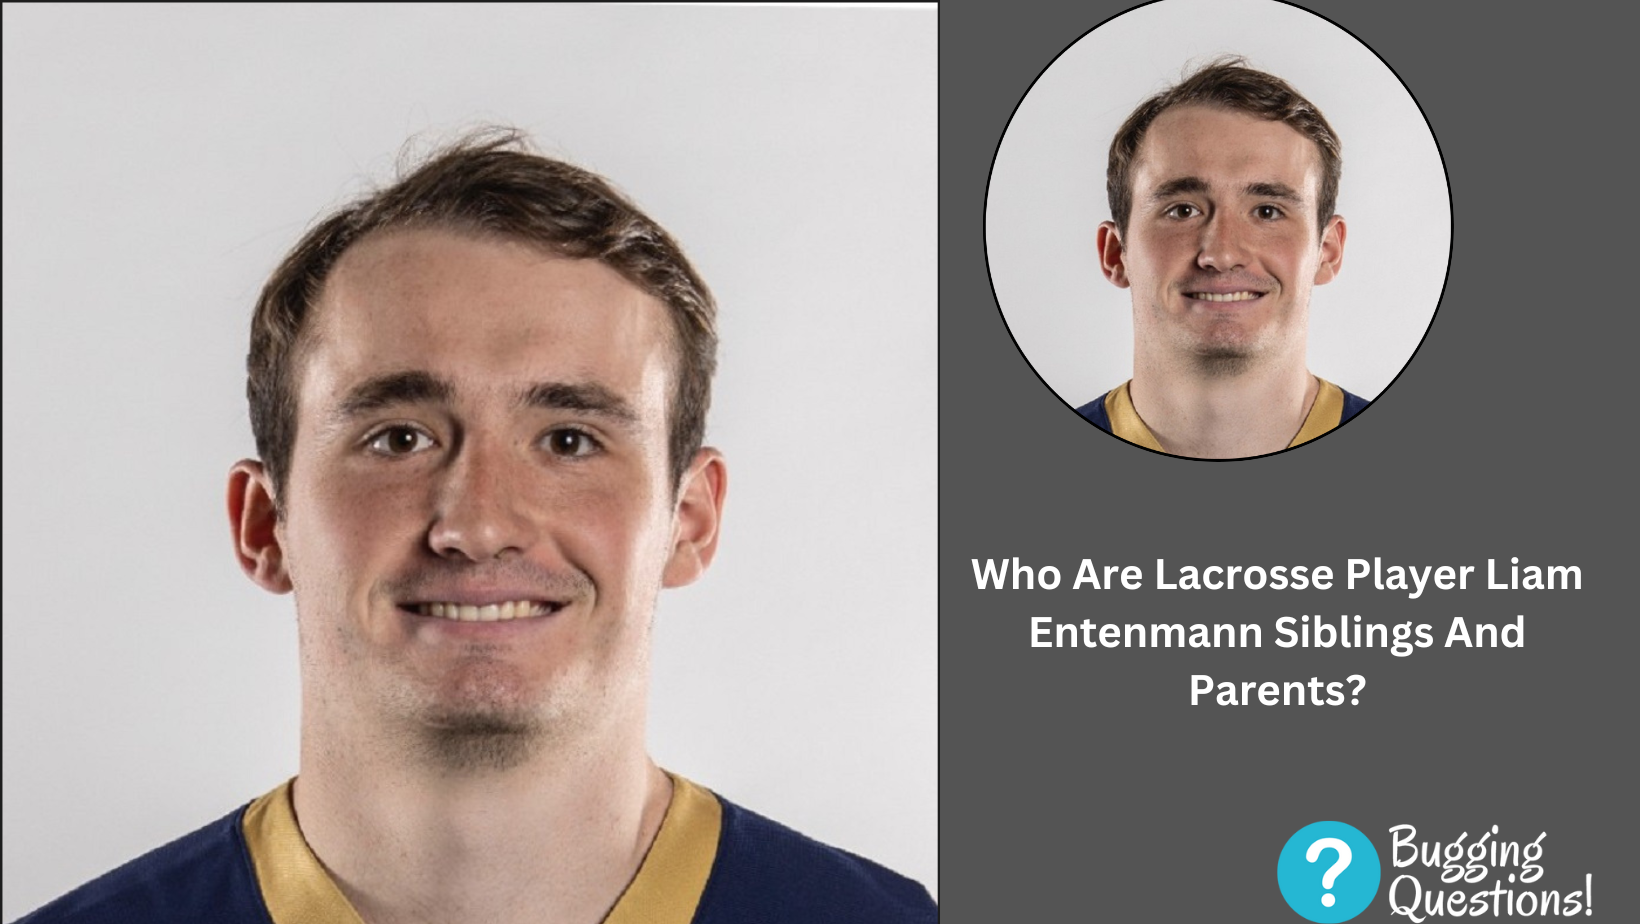 Who Are Lacrosse Player Liam Entenmann Siblings And Parents?